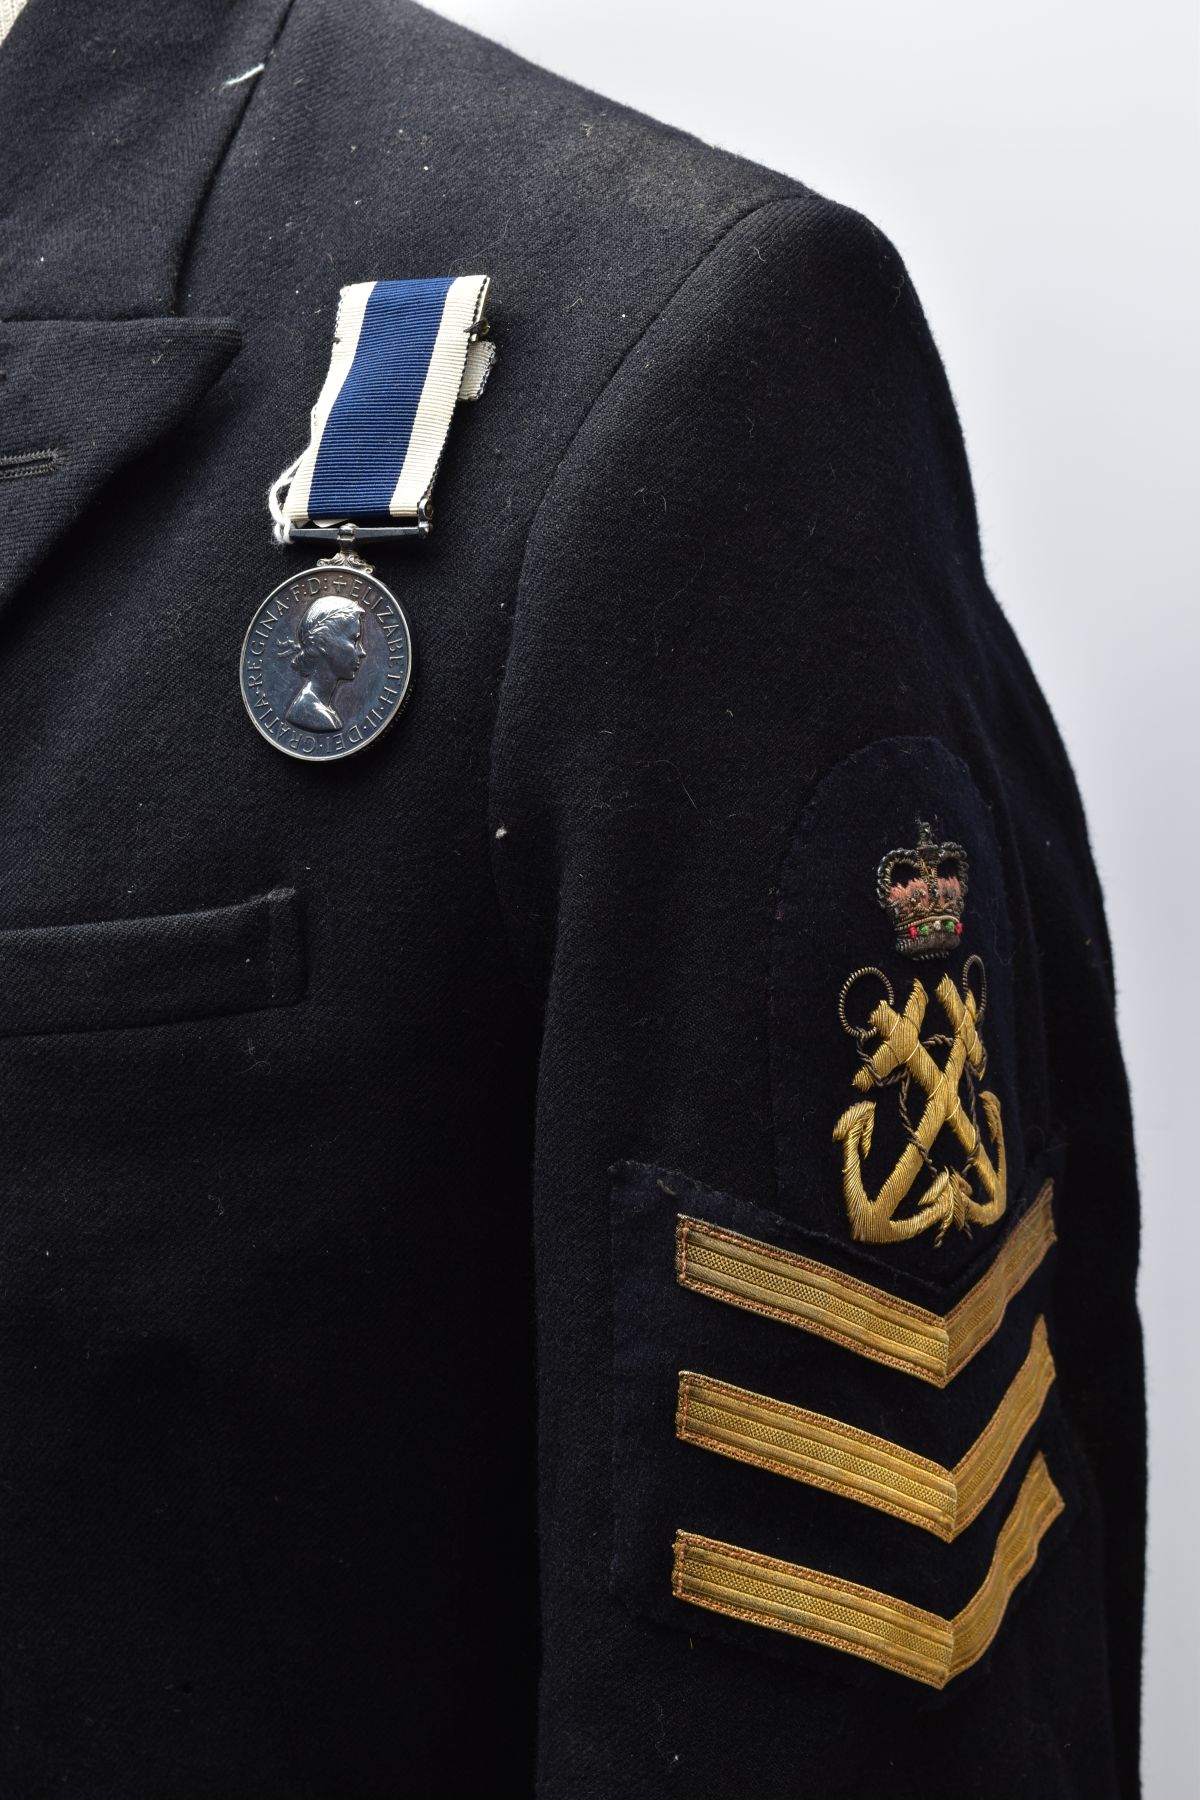 A ROYAL NAVY DRESS UNIFORM JACKET AND TROUSERS, with Rank & Crown patch to left sleeve and AL - Image 2 of 10